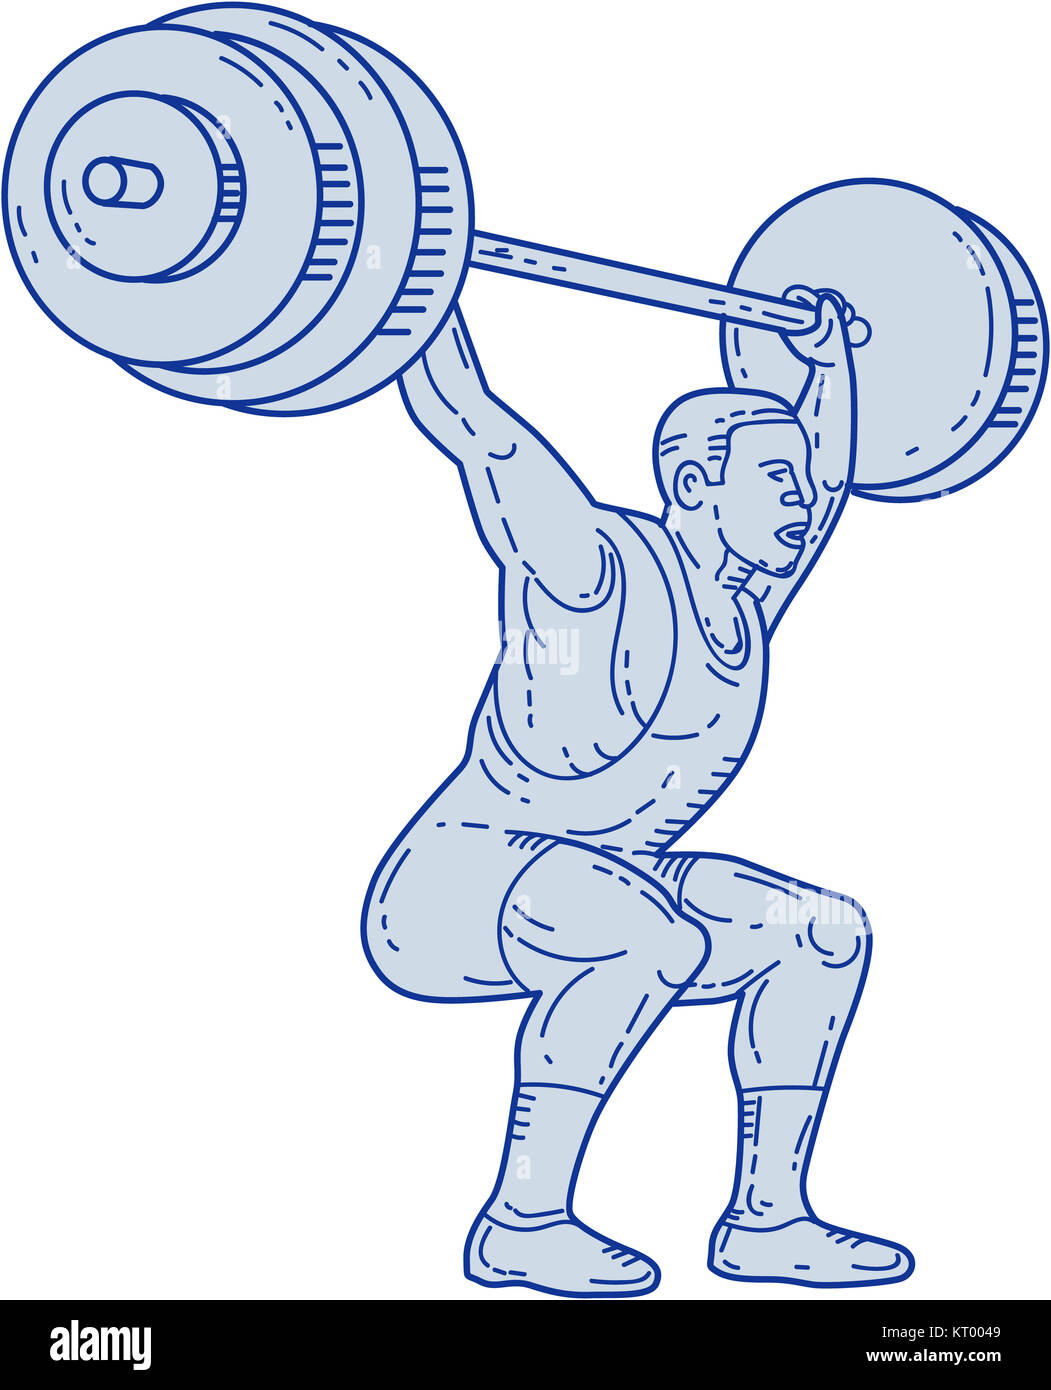 Weightlifter Lifting Barbell Mono Line Stock Photo